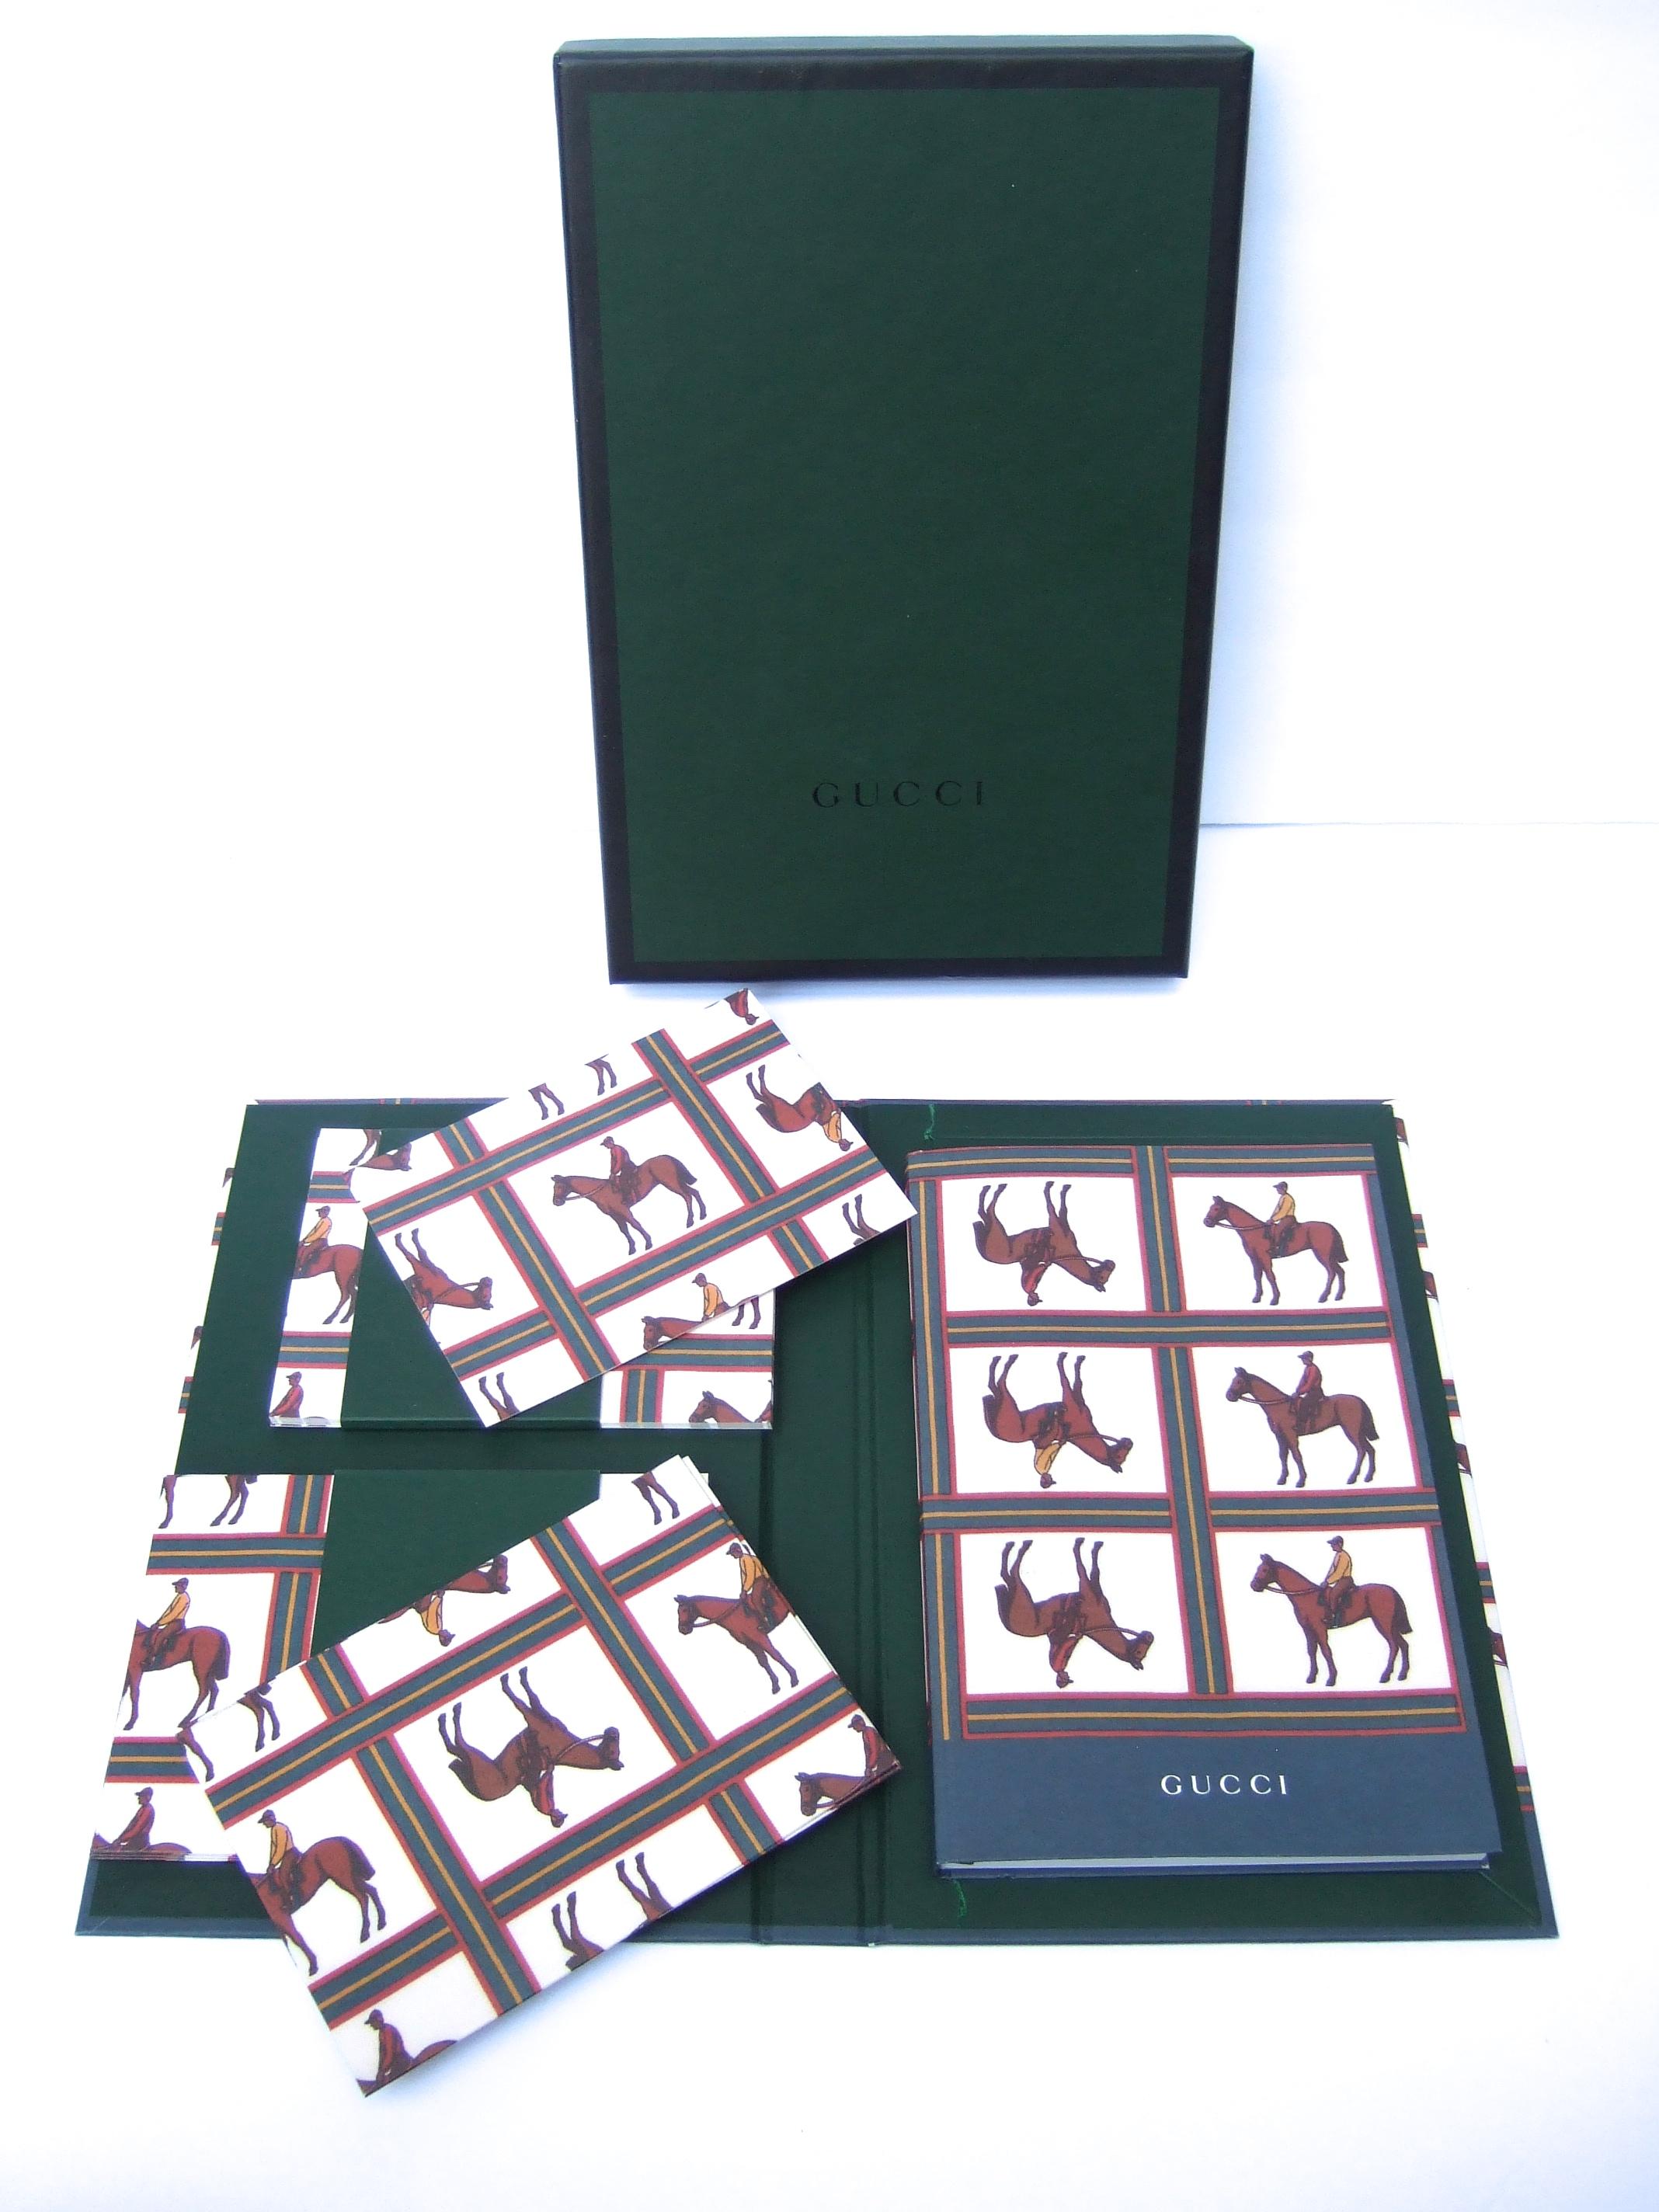 Gucci Equine Design Note Cards & Journal Book Stationery Set in Gucci Box c 1990 For Sale 5